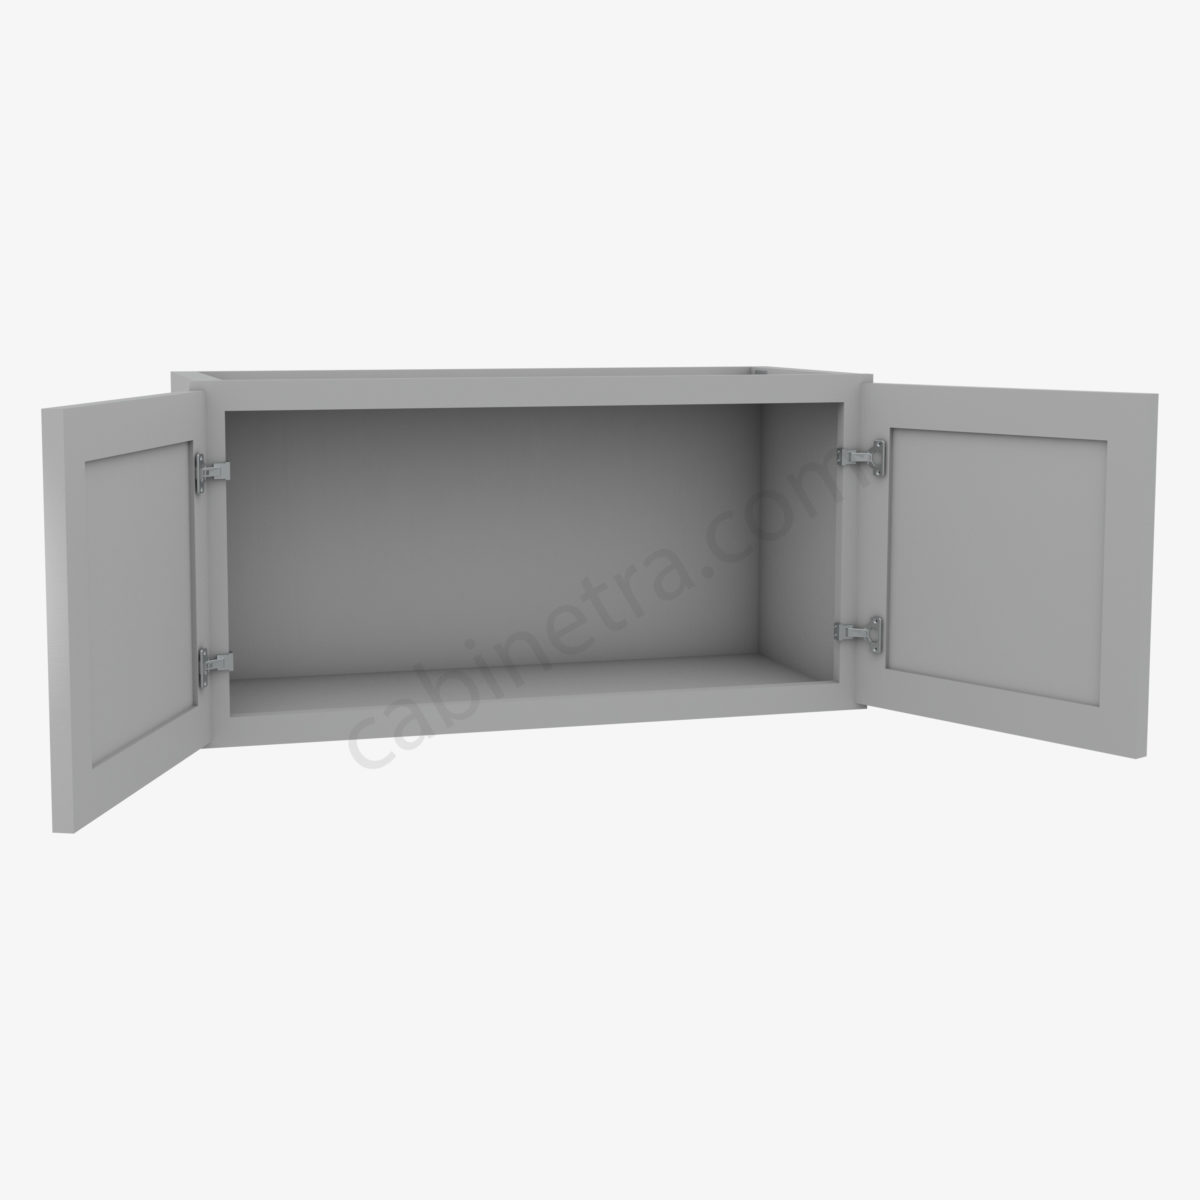 AB W3015B 1 Forevermark Lait Gray Shaker Cabinetra scaled